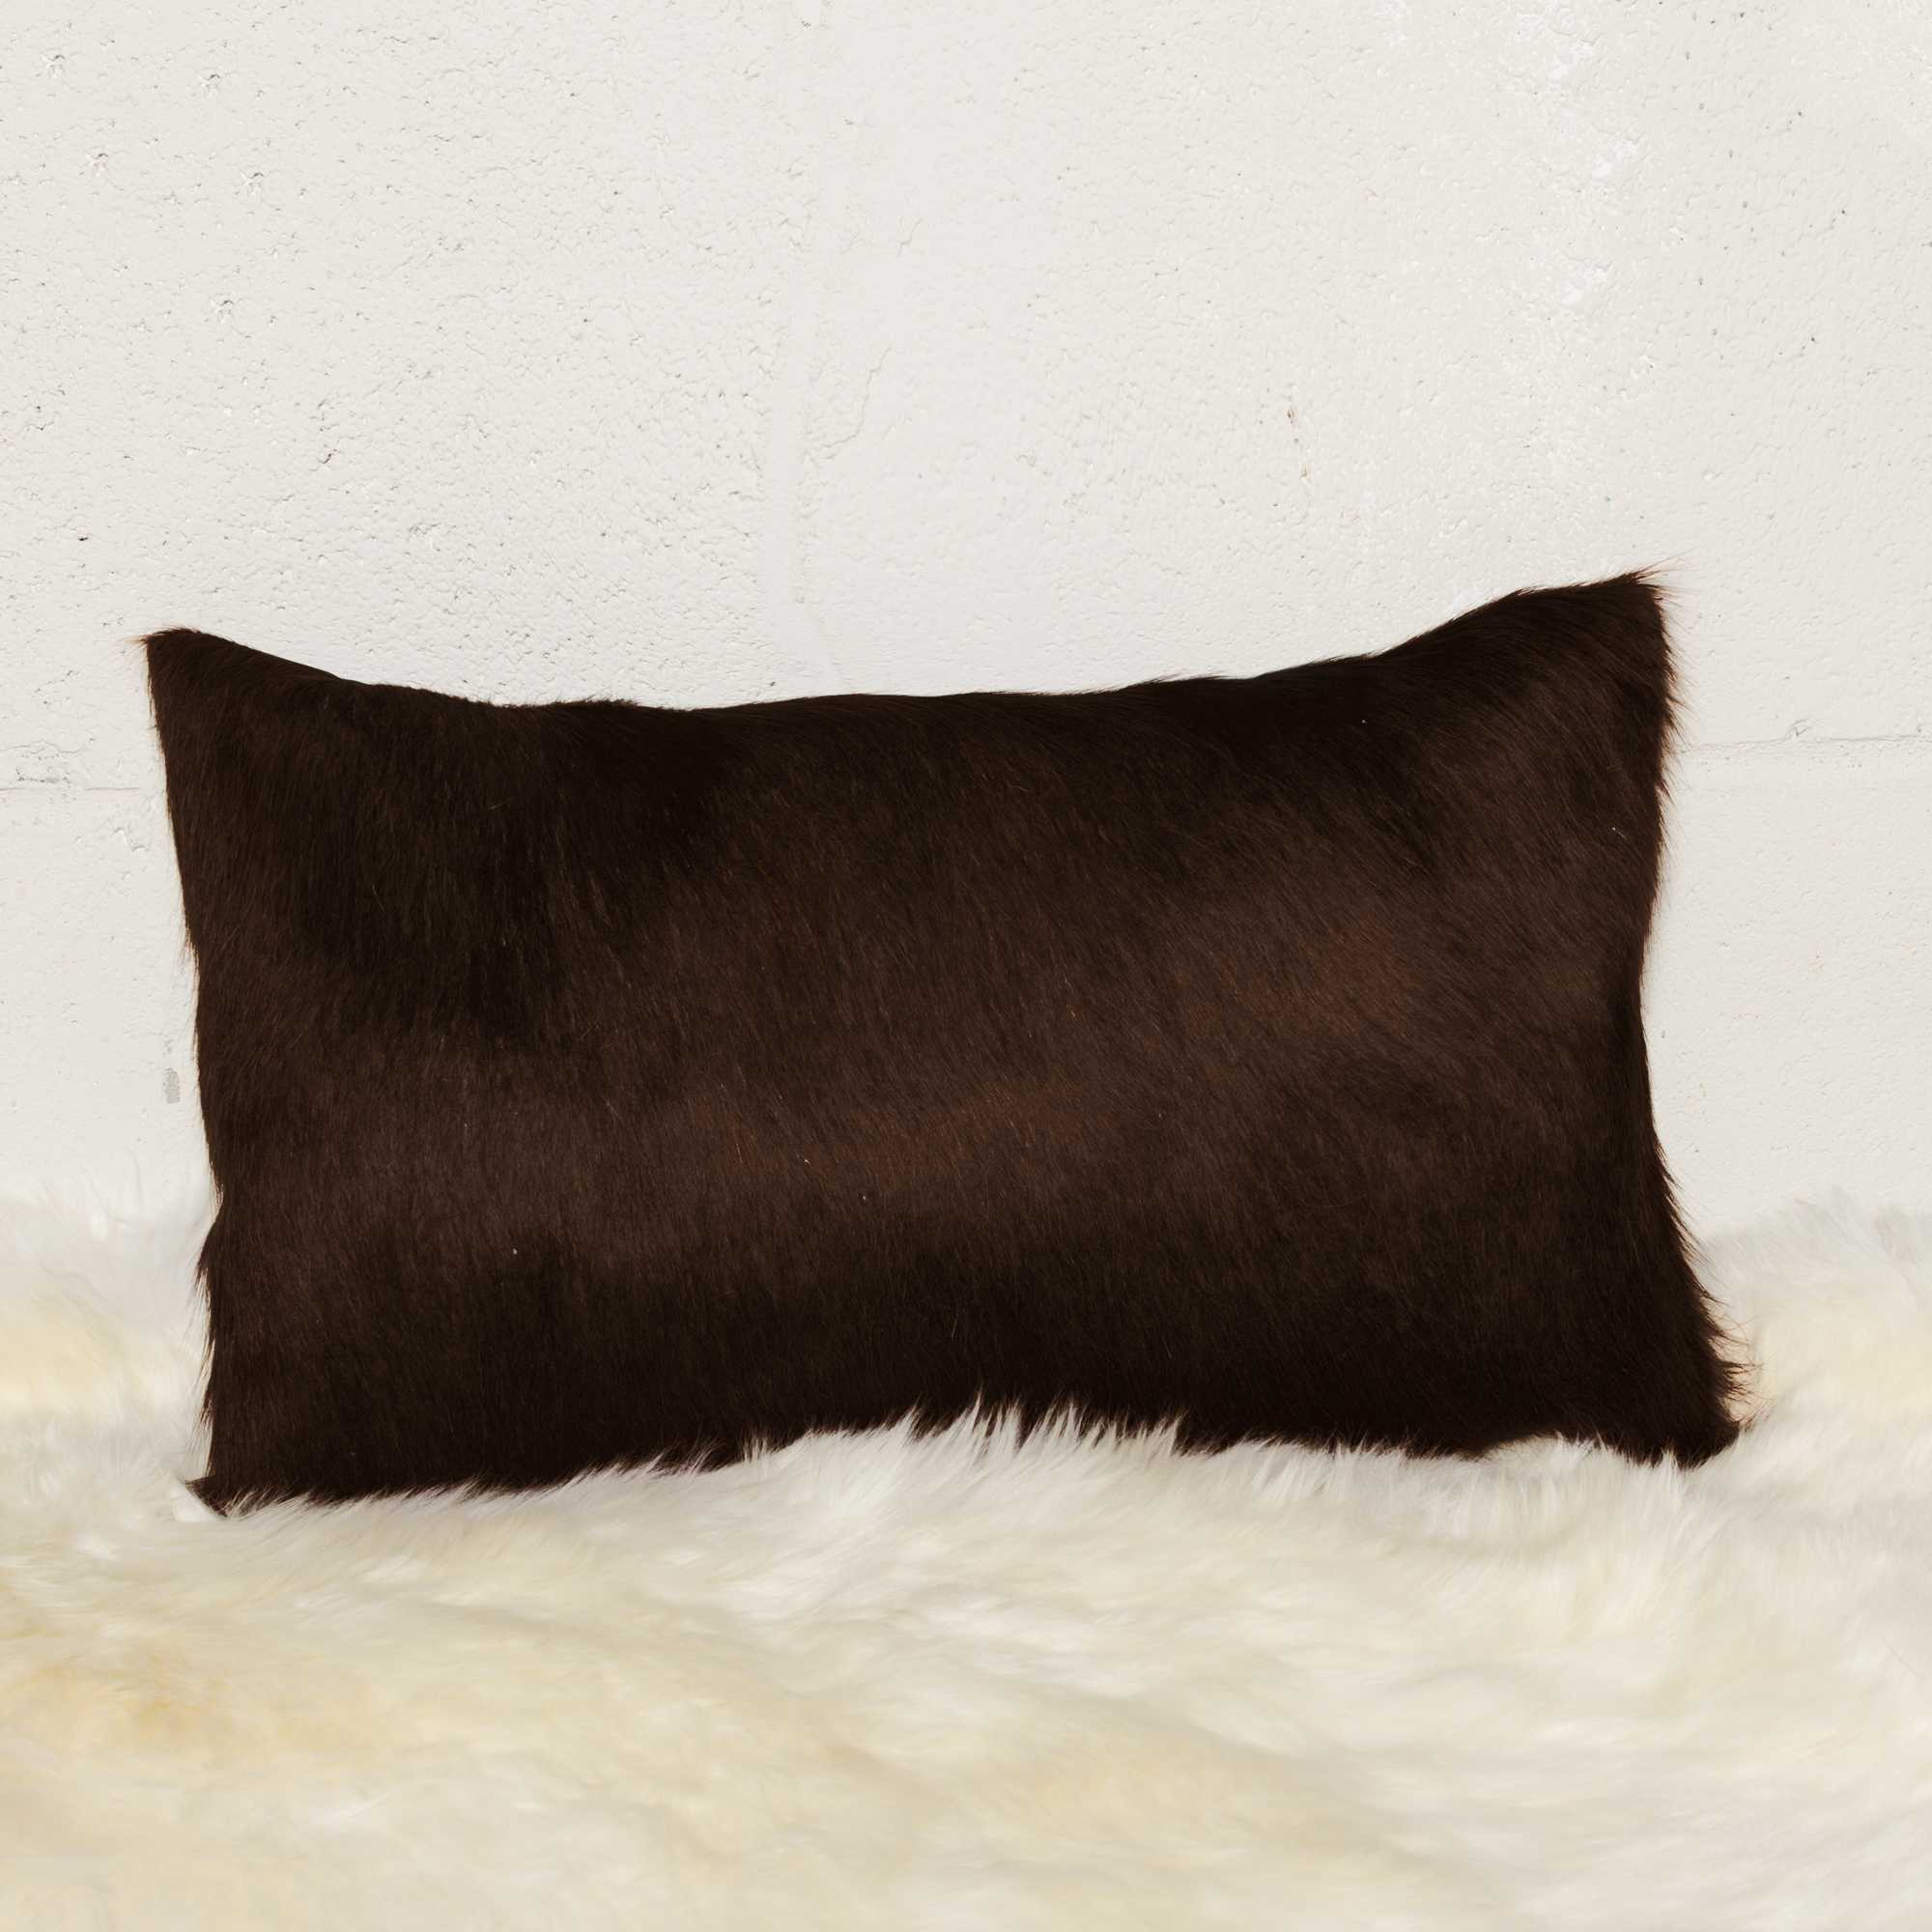 12" x 20" x 5" Chocolate, Cowhide - Pillow 2-Pack